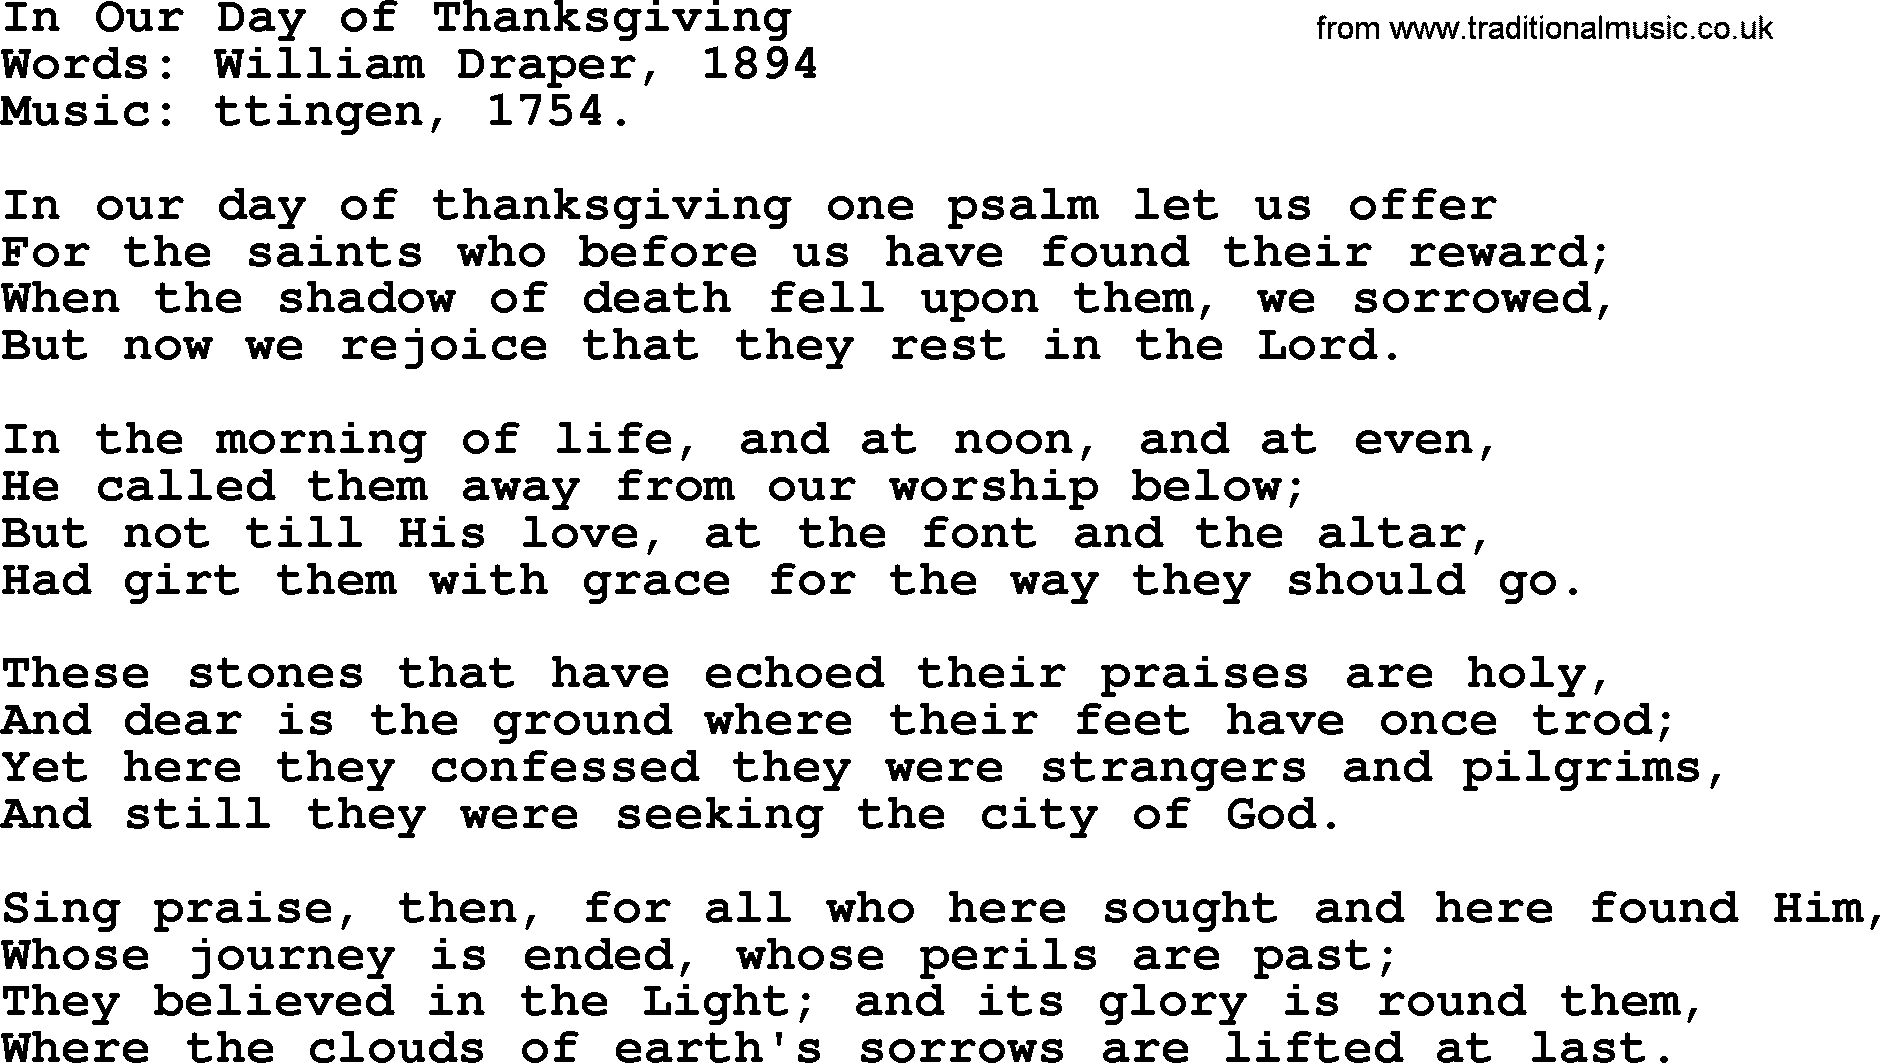 Thanksgiving Hymns and Songs: In Our Day Of Thanksgiving lyrics with PDF